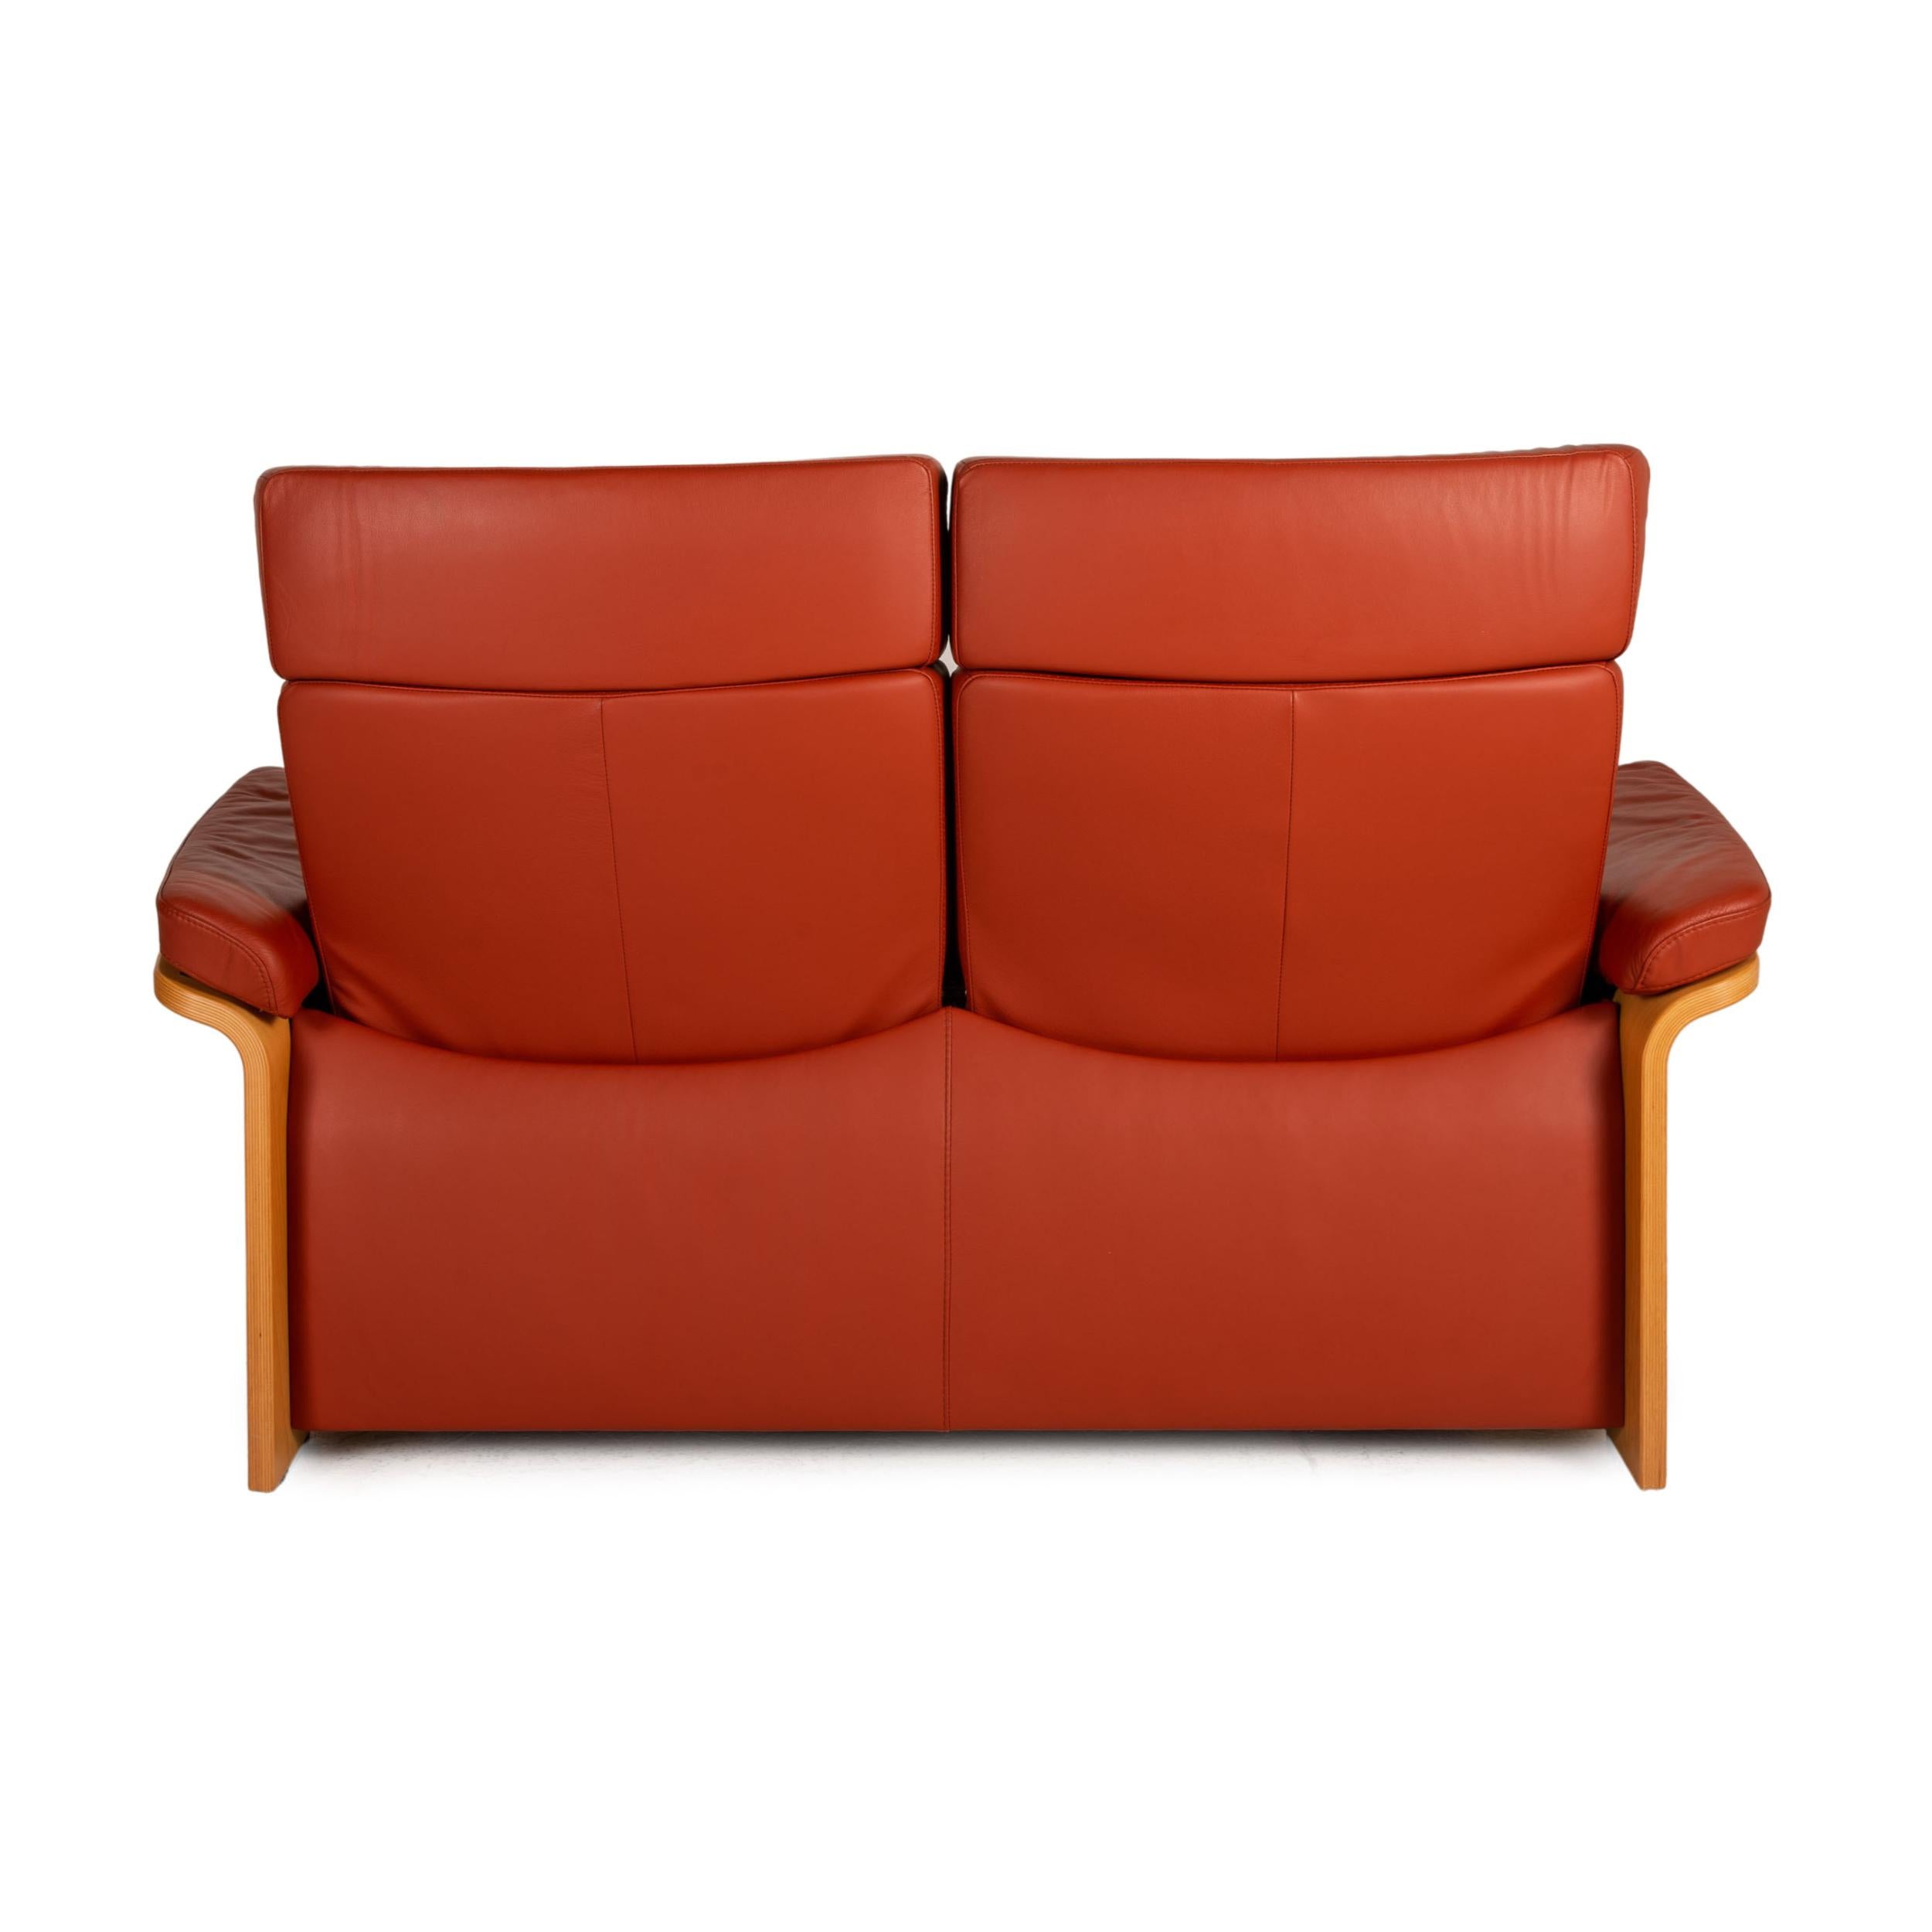 Stressless Pegasus Leather Sofa Set Red 2x Two-Seater 1x Side Table 3